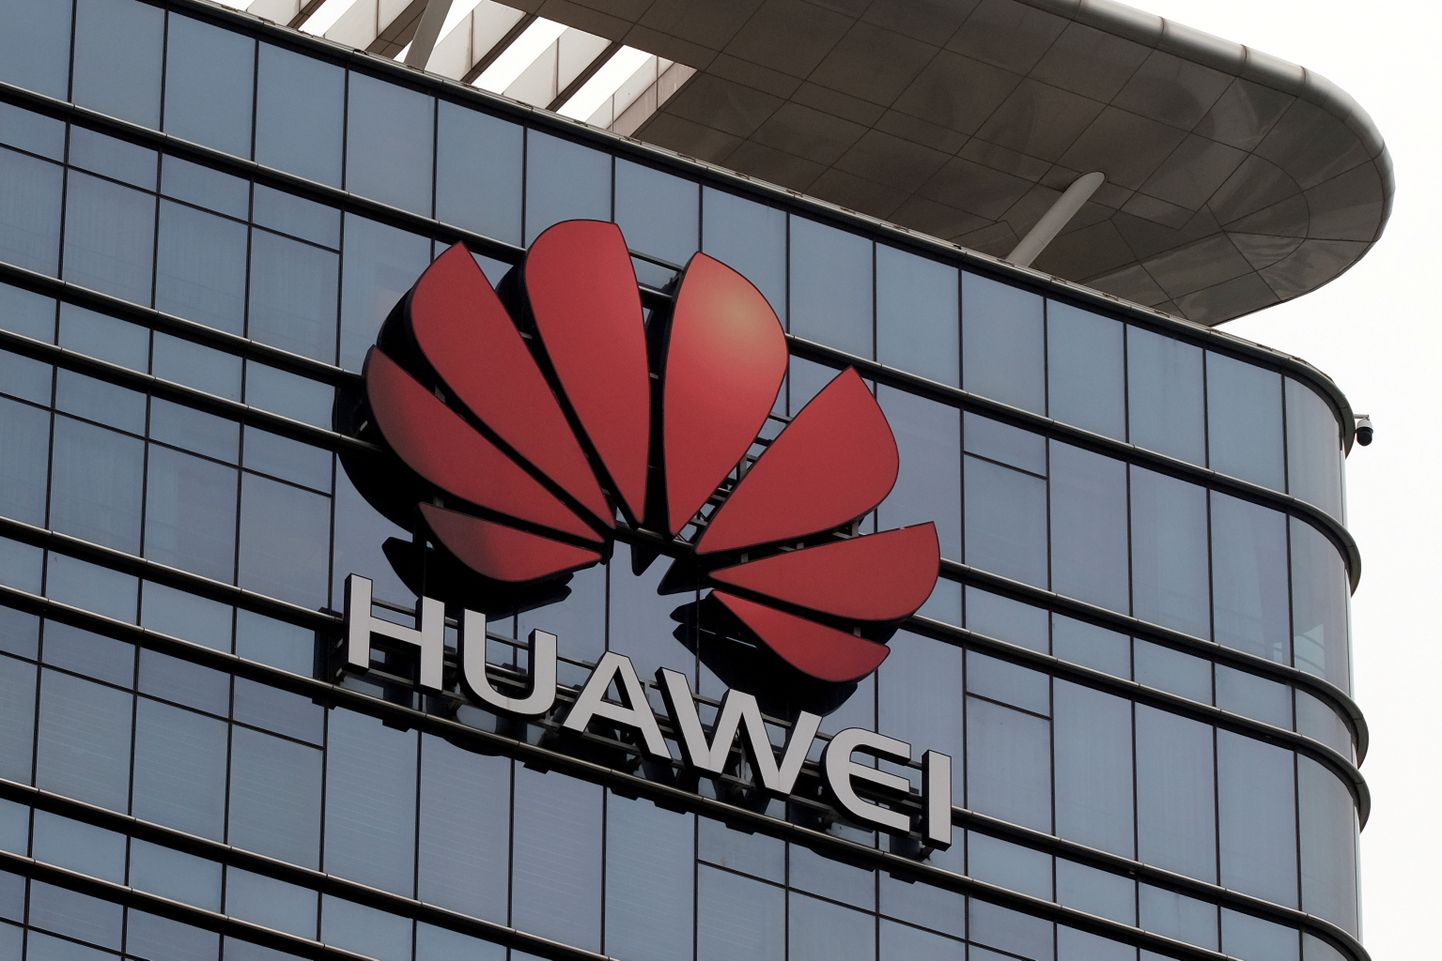 FILE PHOTO: The Huawei logo is pictured outside its Huawei's factory campus in Dongguan, Guangdong province, China, March 25, 2019. REUTERS/Tyrone Siu/File Photo